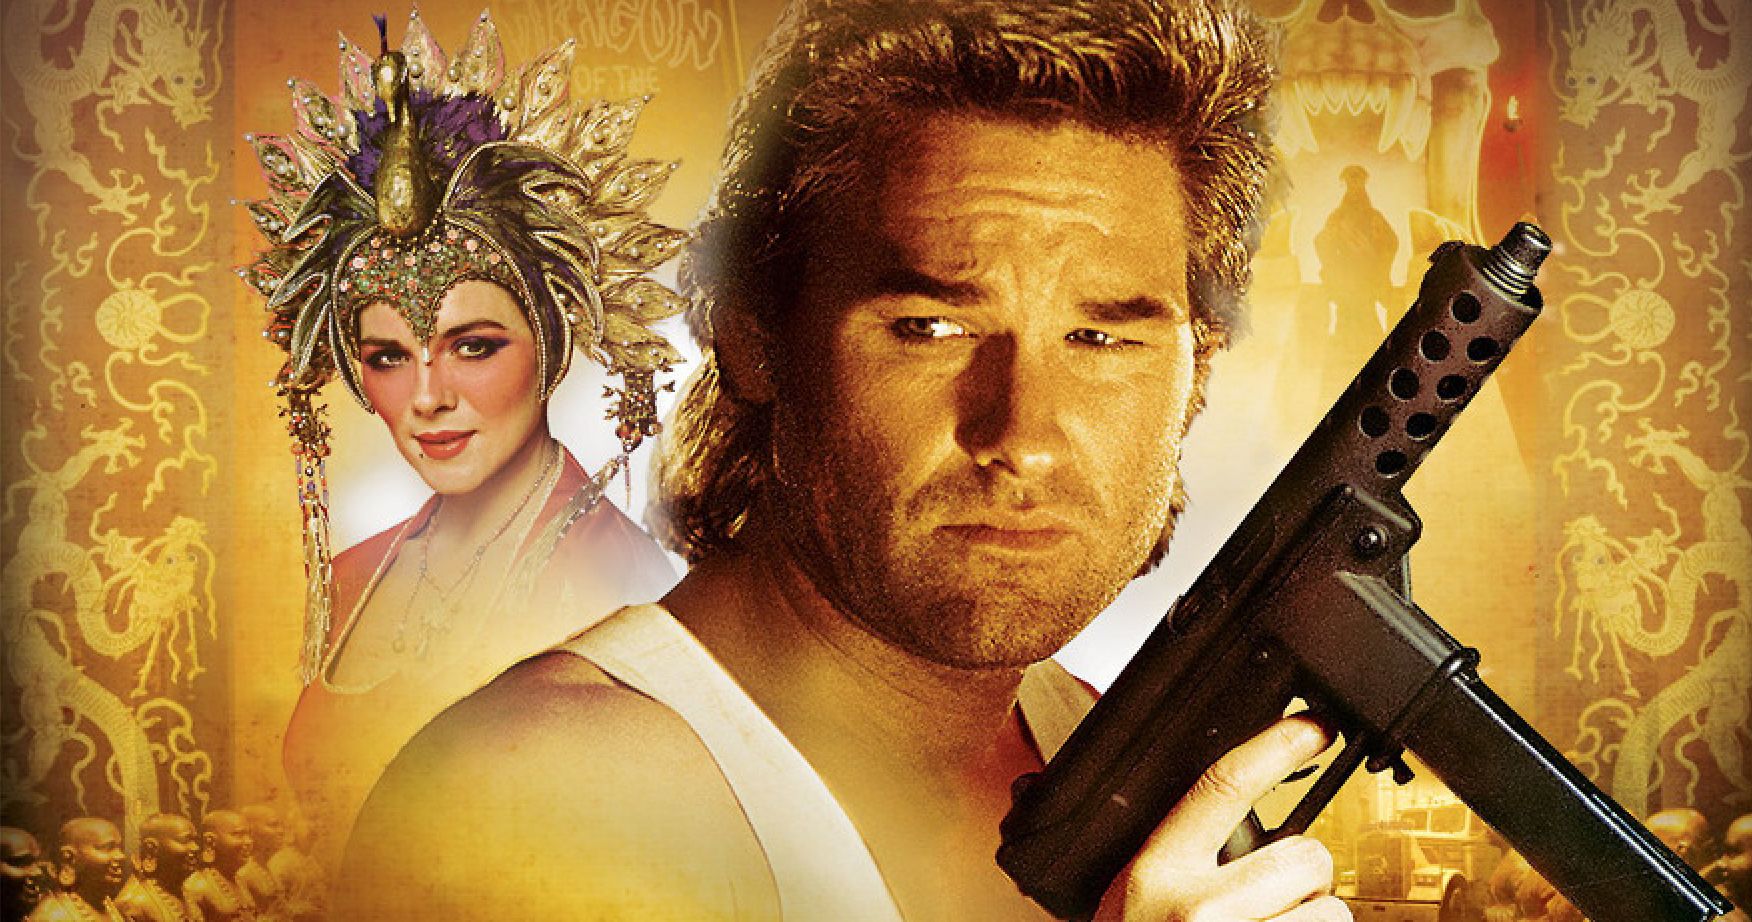 Big Trouble in Little China Is Streaming for Free on YouTube Right Now